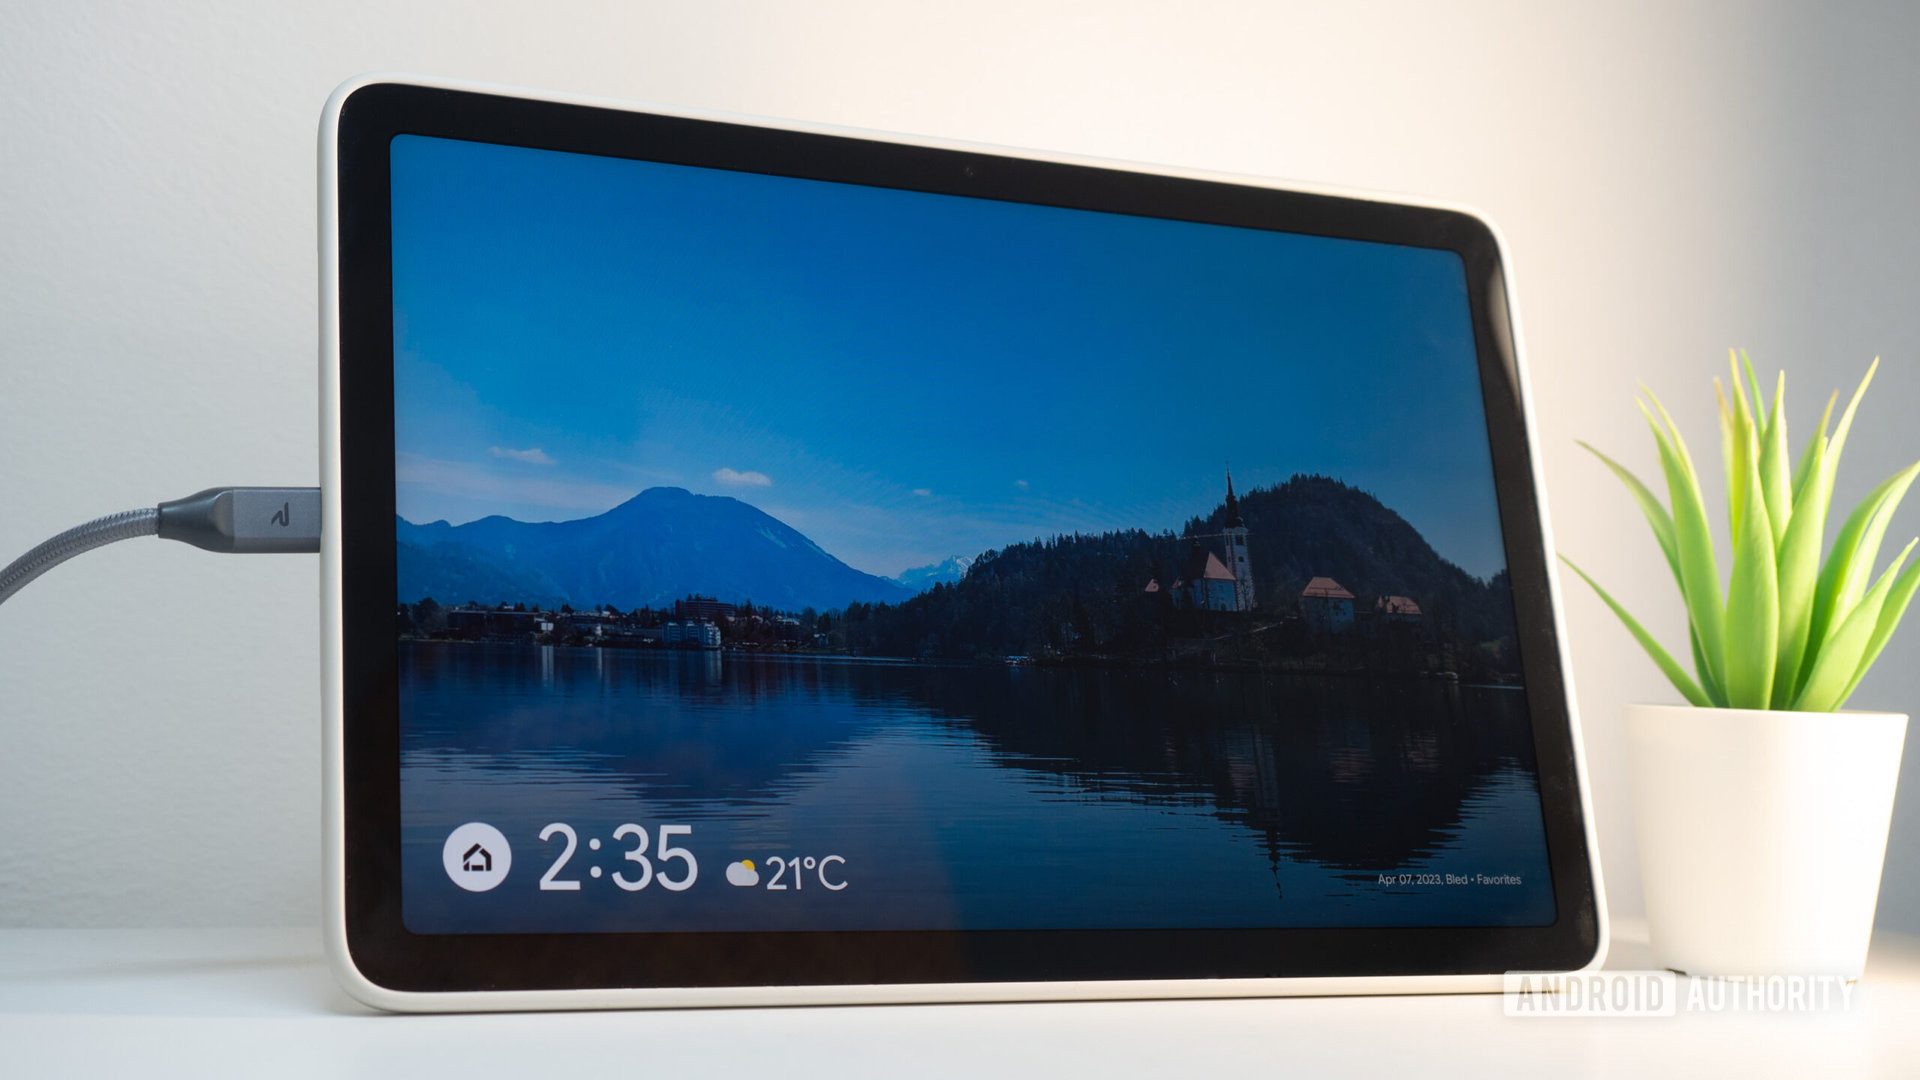 Android 15 will let you add widgets to the lock screen, but only on tablets